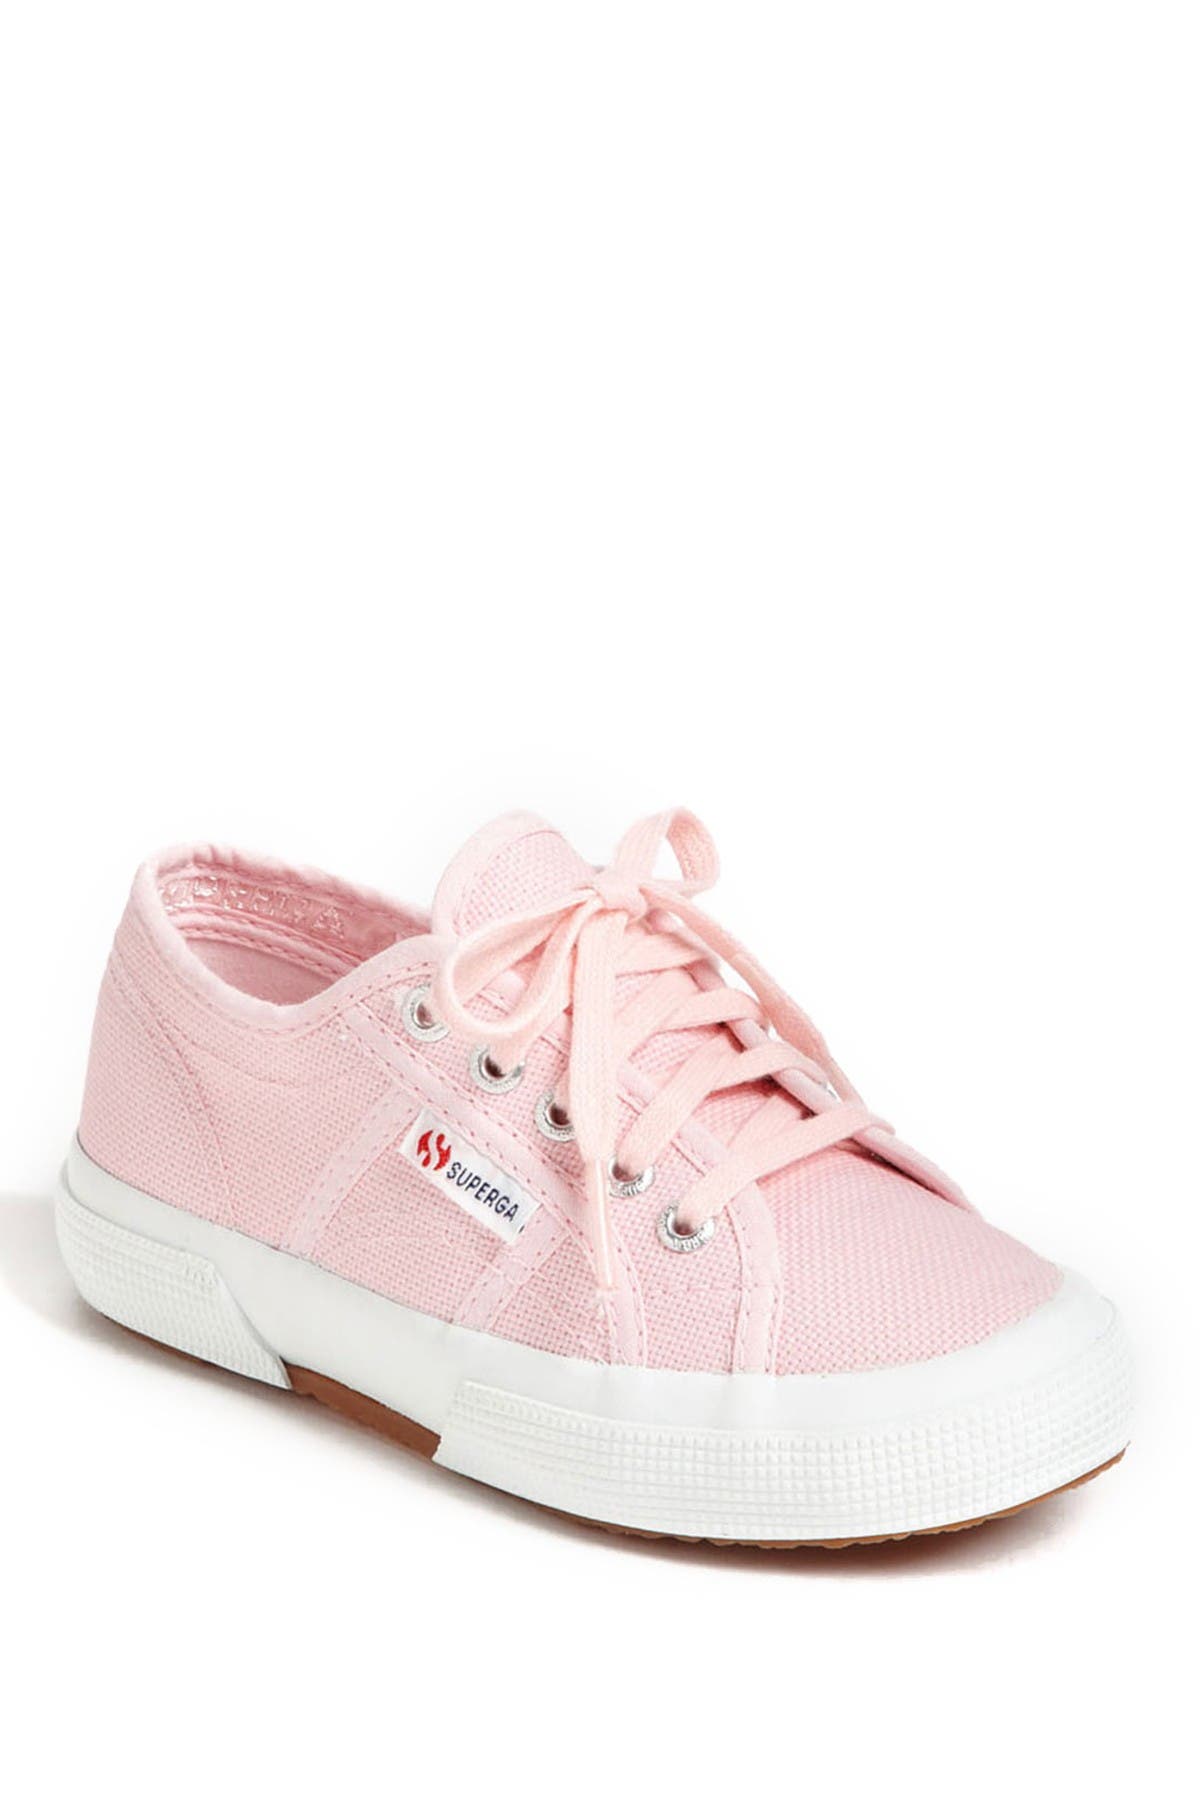 superga lace up sneakers